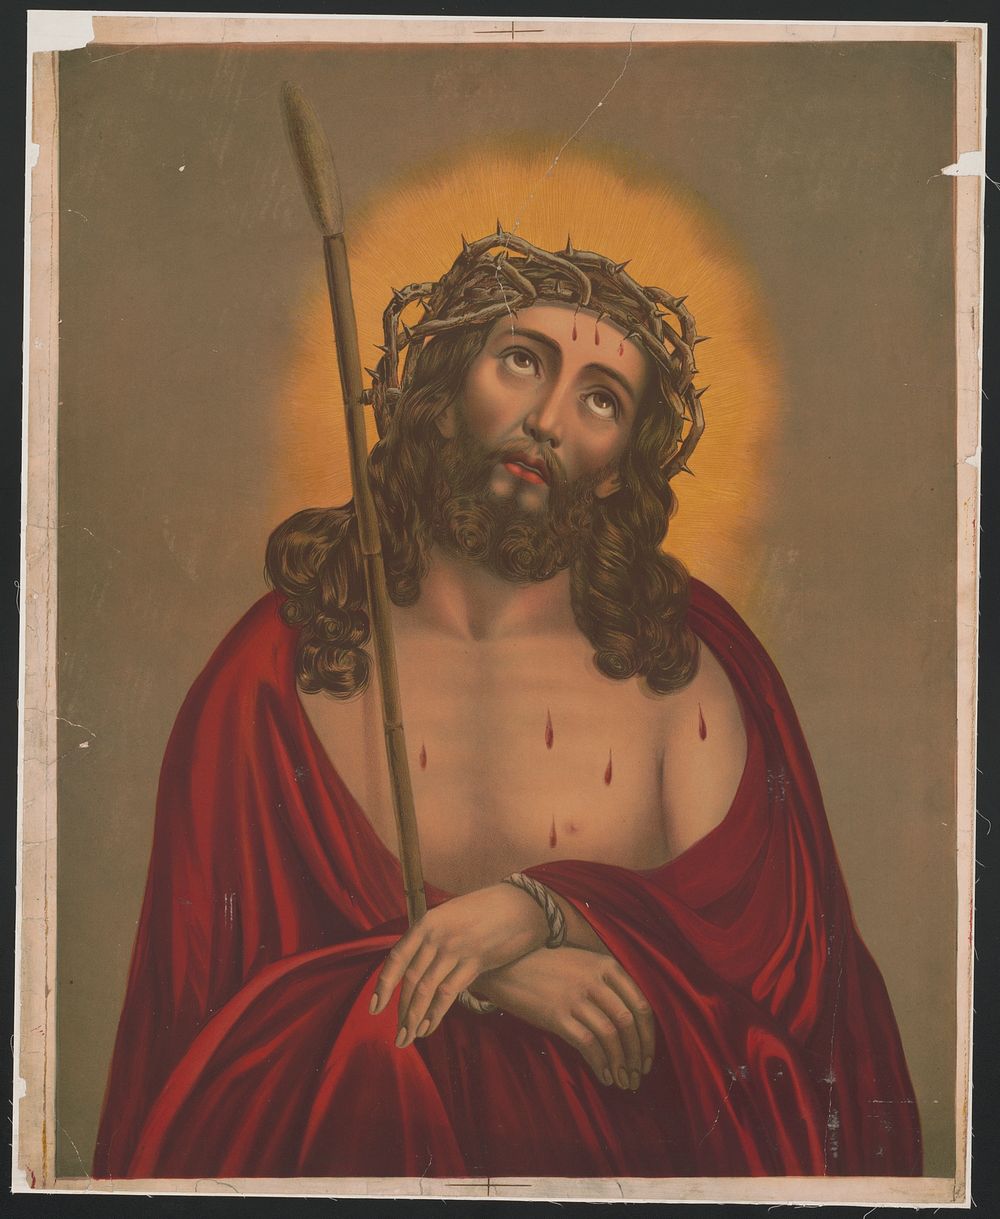 [Jesus Christ with crown of thorns]